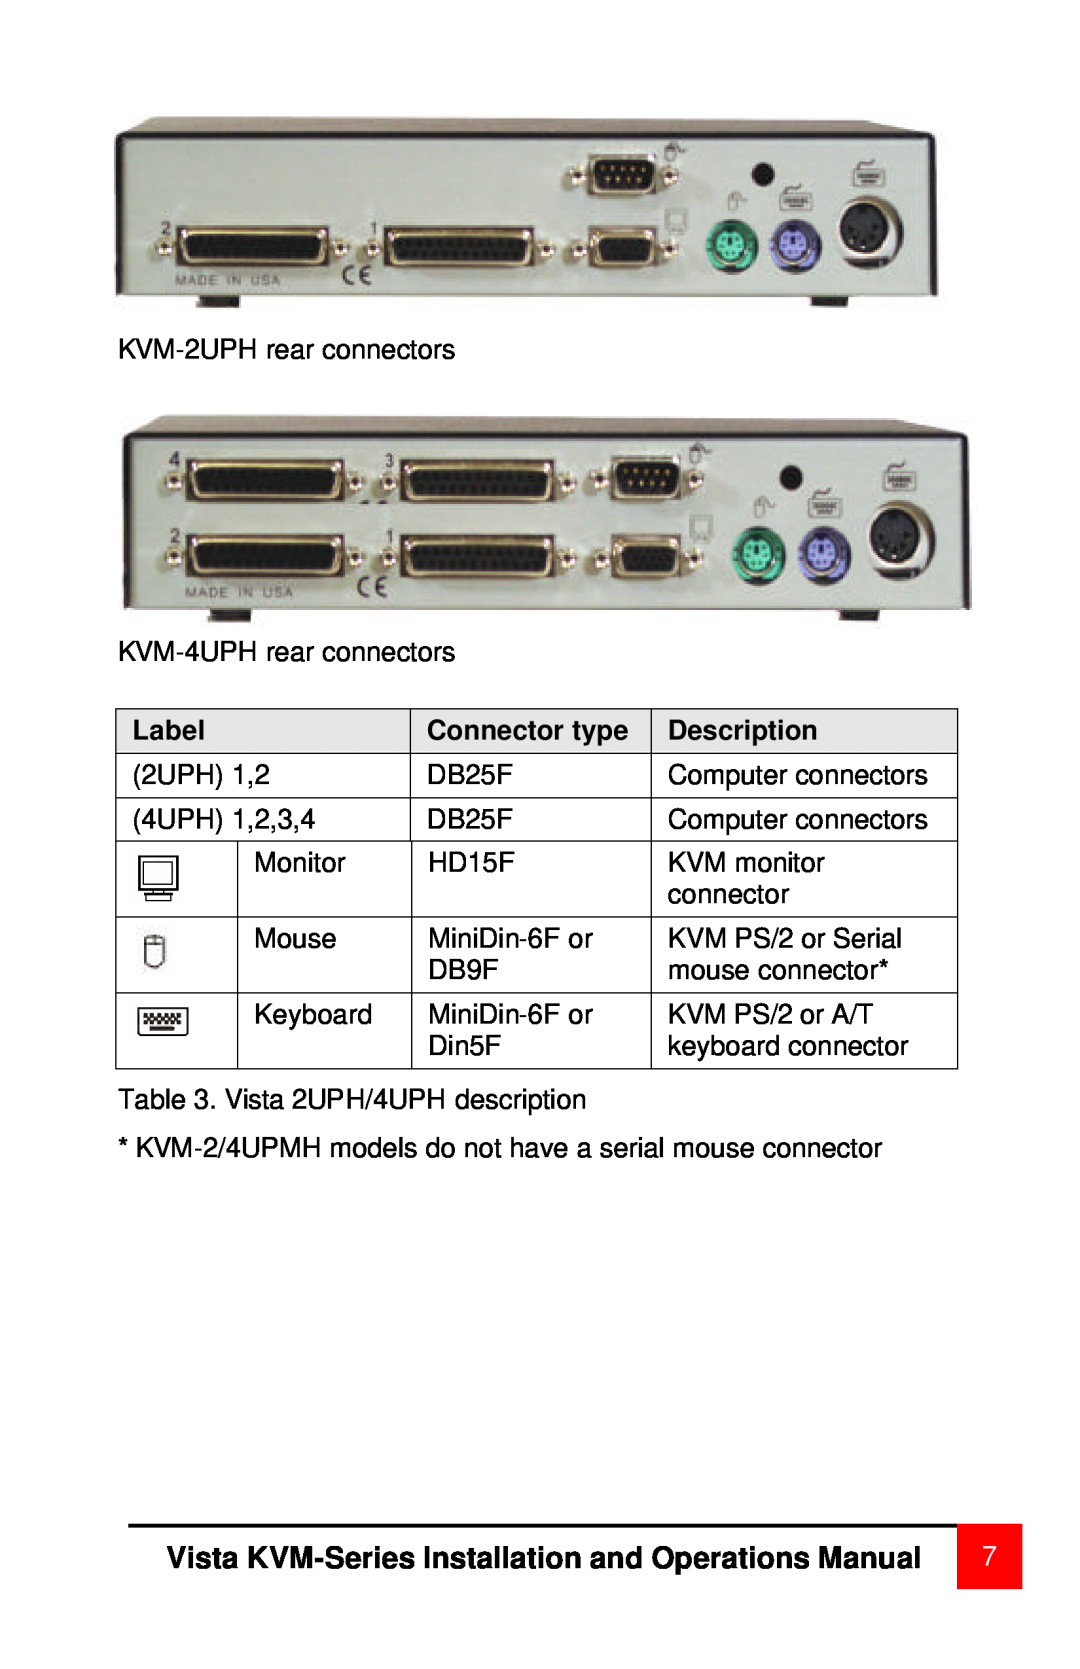 Rose electronic MAN-V8 manual Label, Connector type, Description, Vista KVM-Series Installation and Operations Manual 